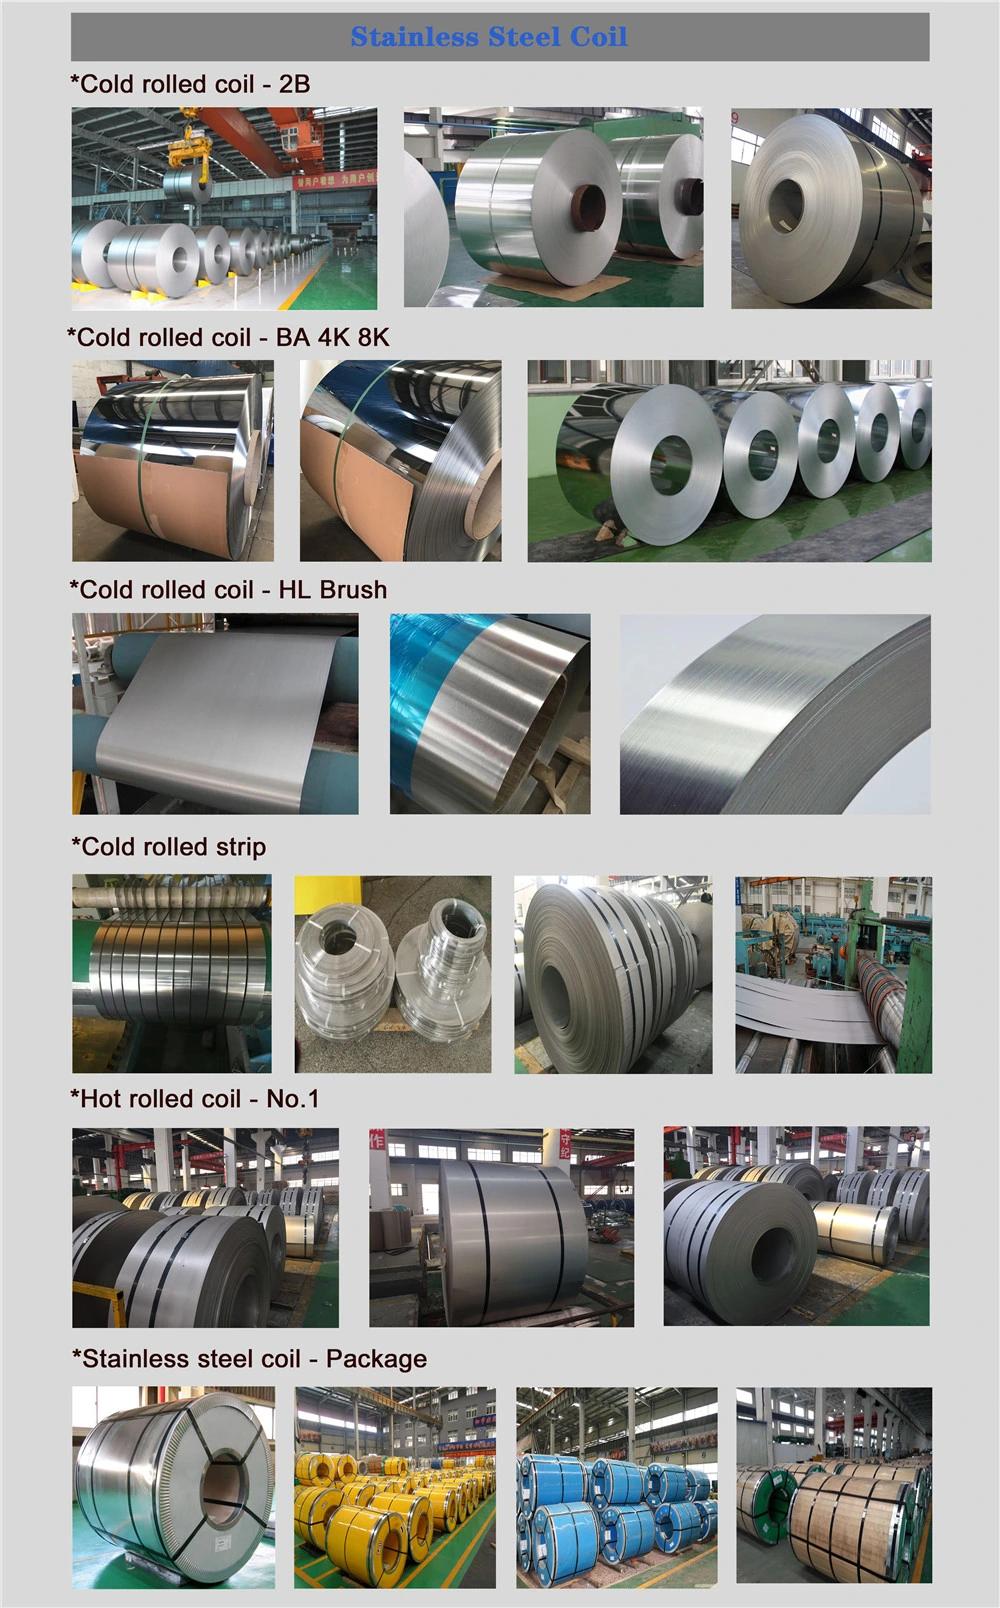 Inox Cold Rolled Stainless Steel Sheet 304 2b Stainless Steel Sheet with Fast shipment